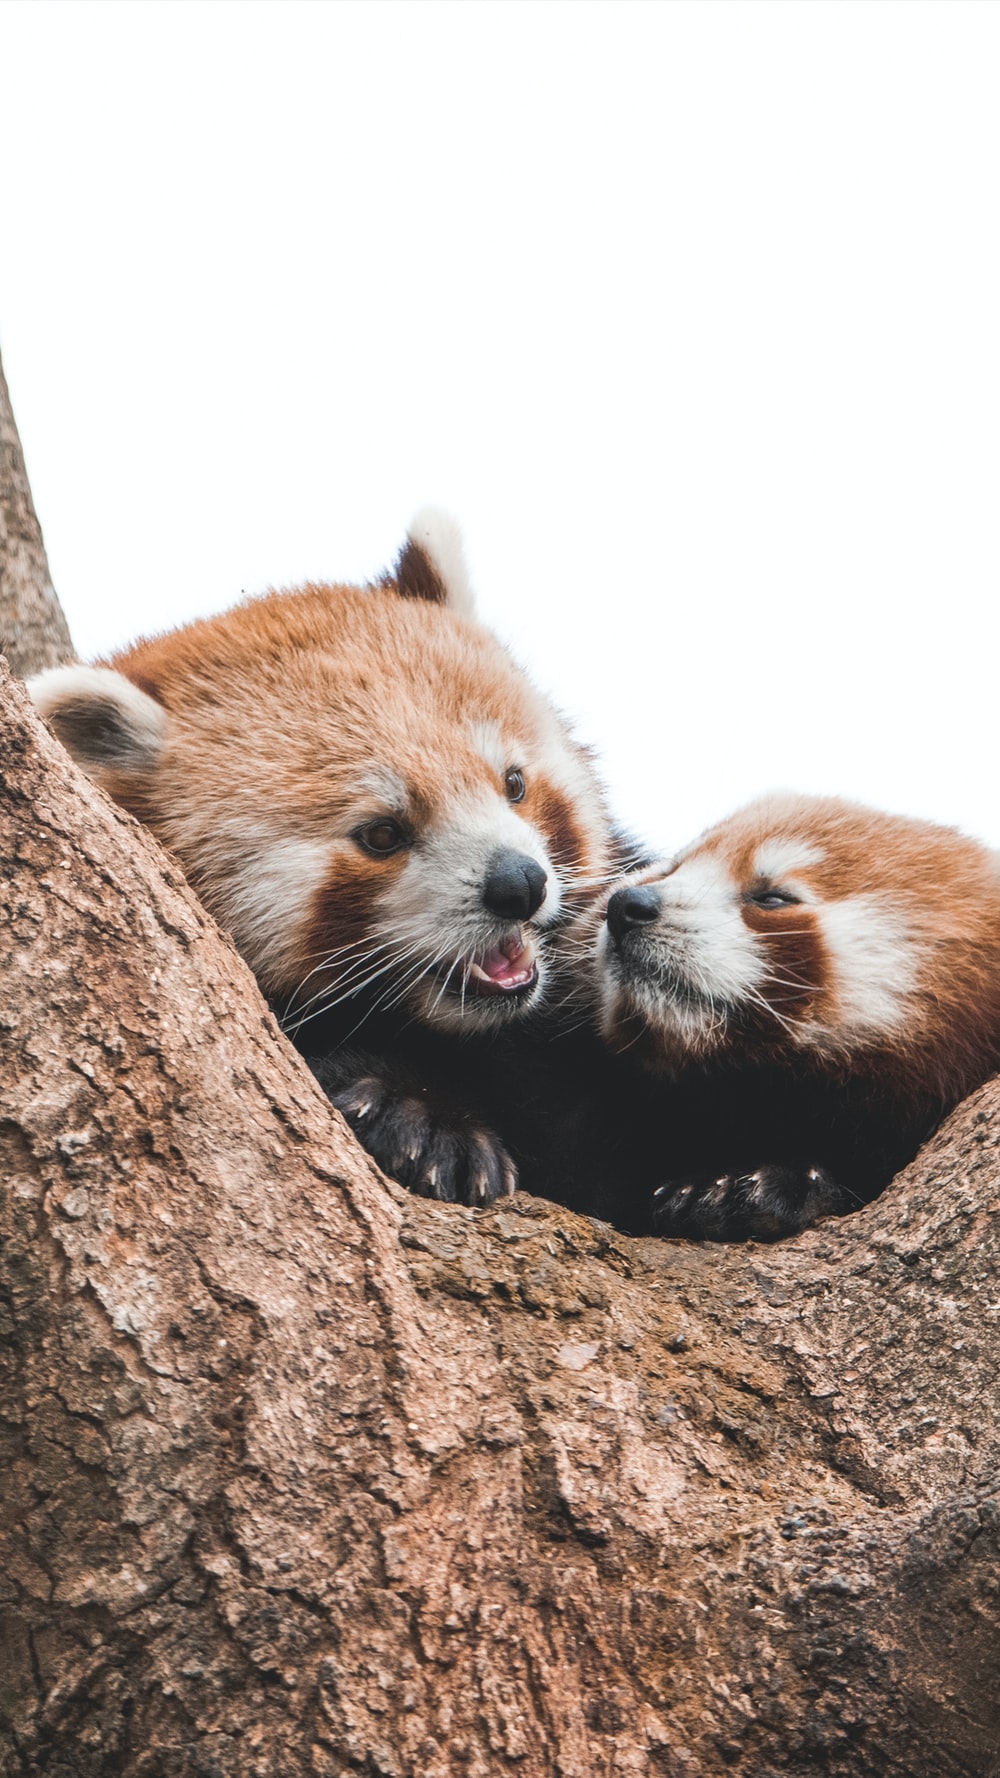 Red Panda Picture. Download Free Image